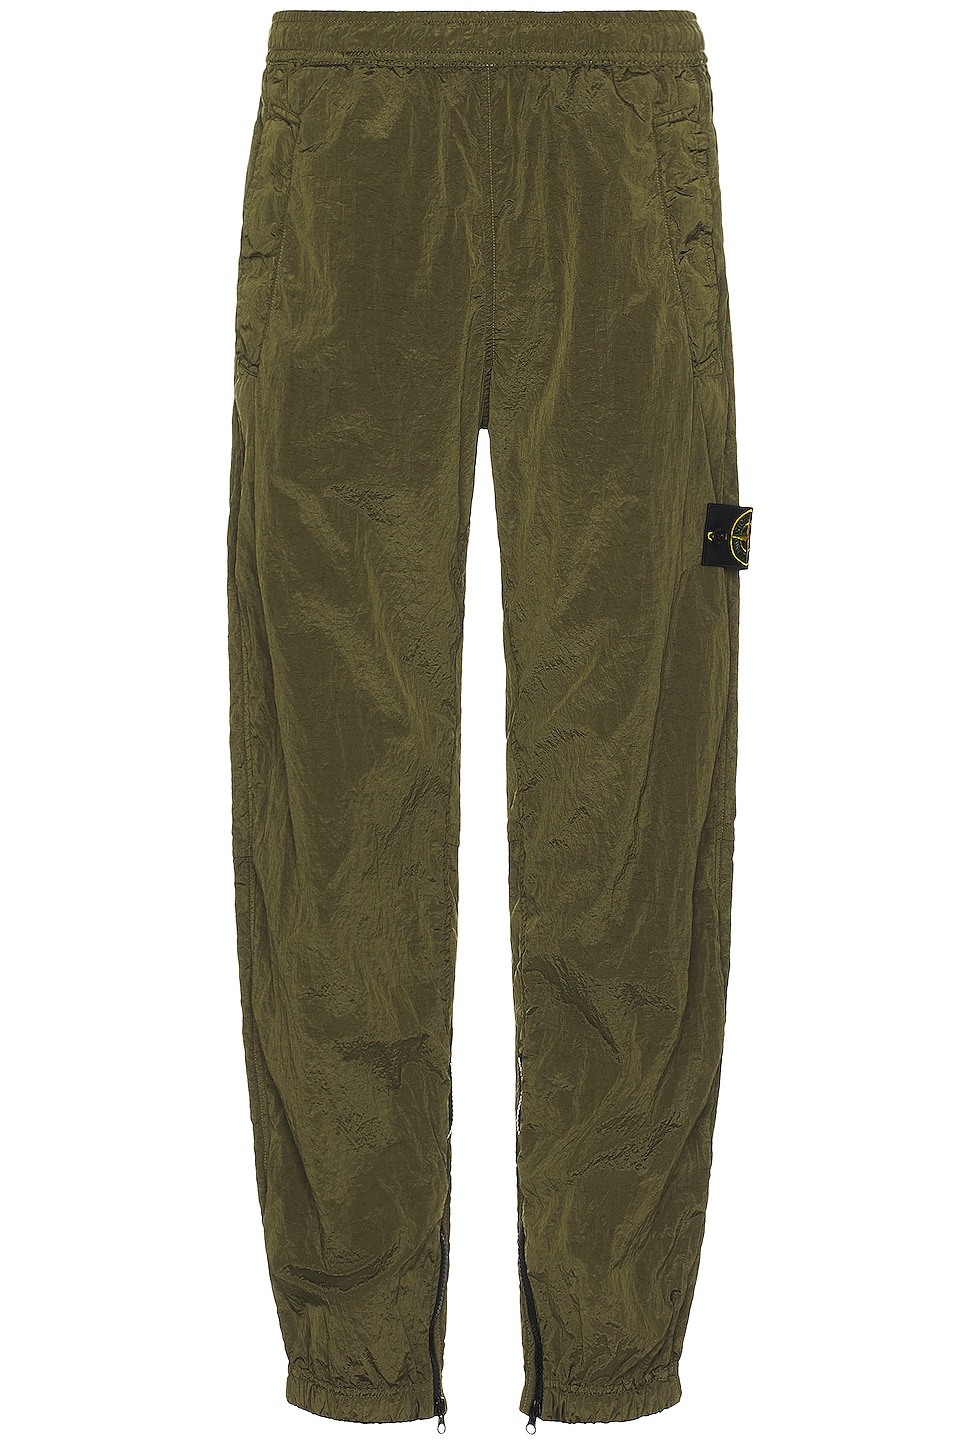 Image 1 of Stone Island Pants in Olive